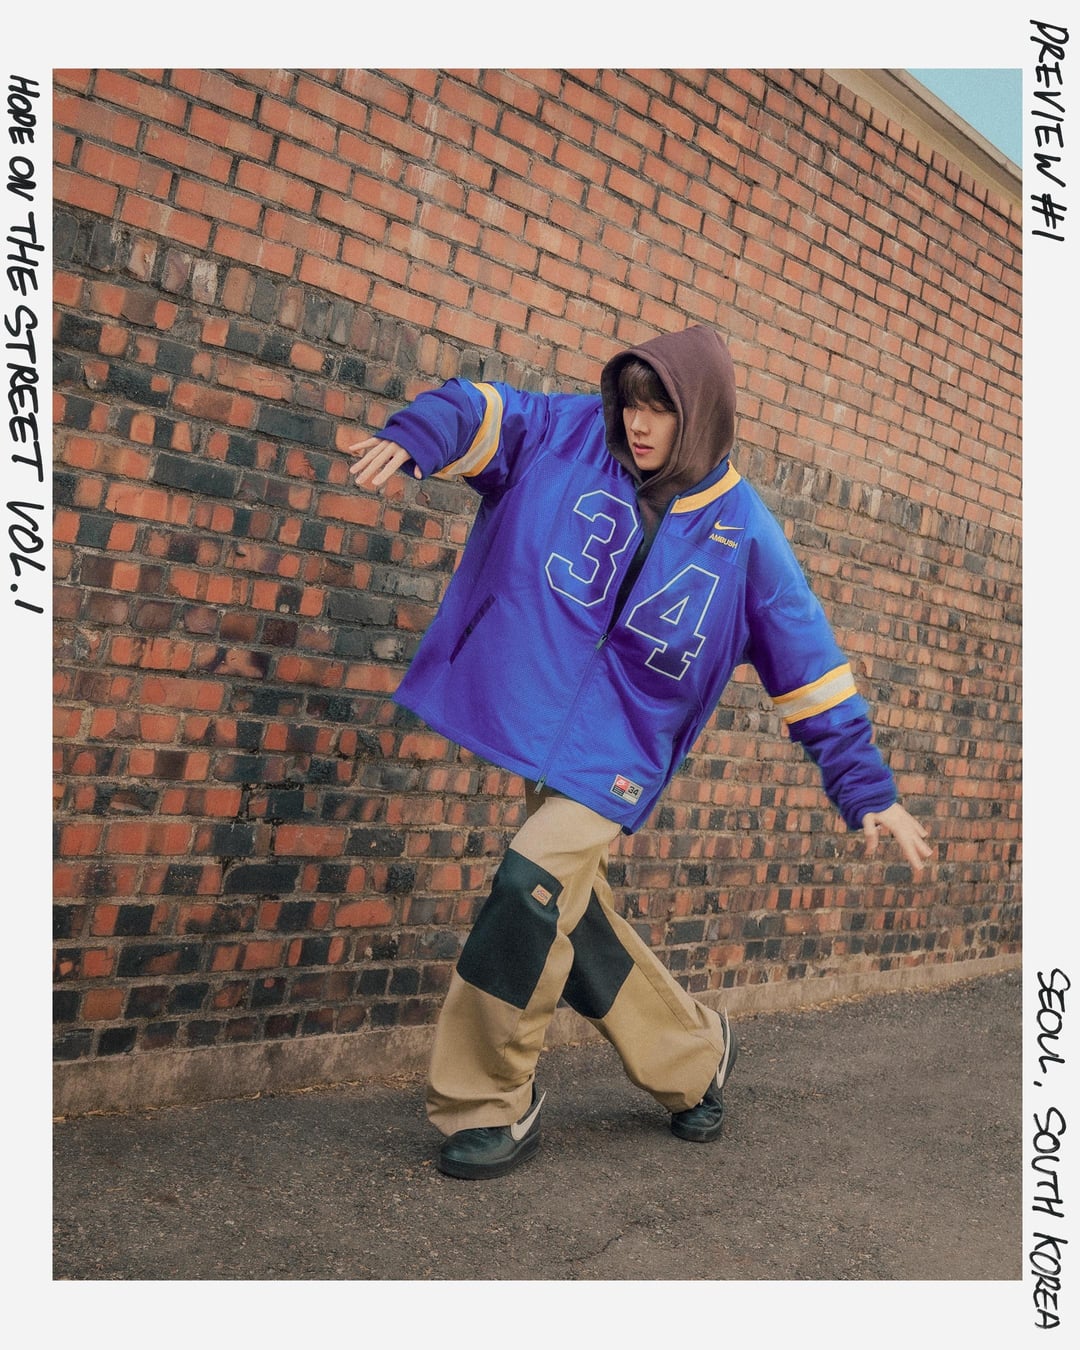 j-hope ‘HOPE ON THE STREET VOL. 1’ Preview Cut - 220224